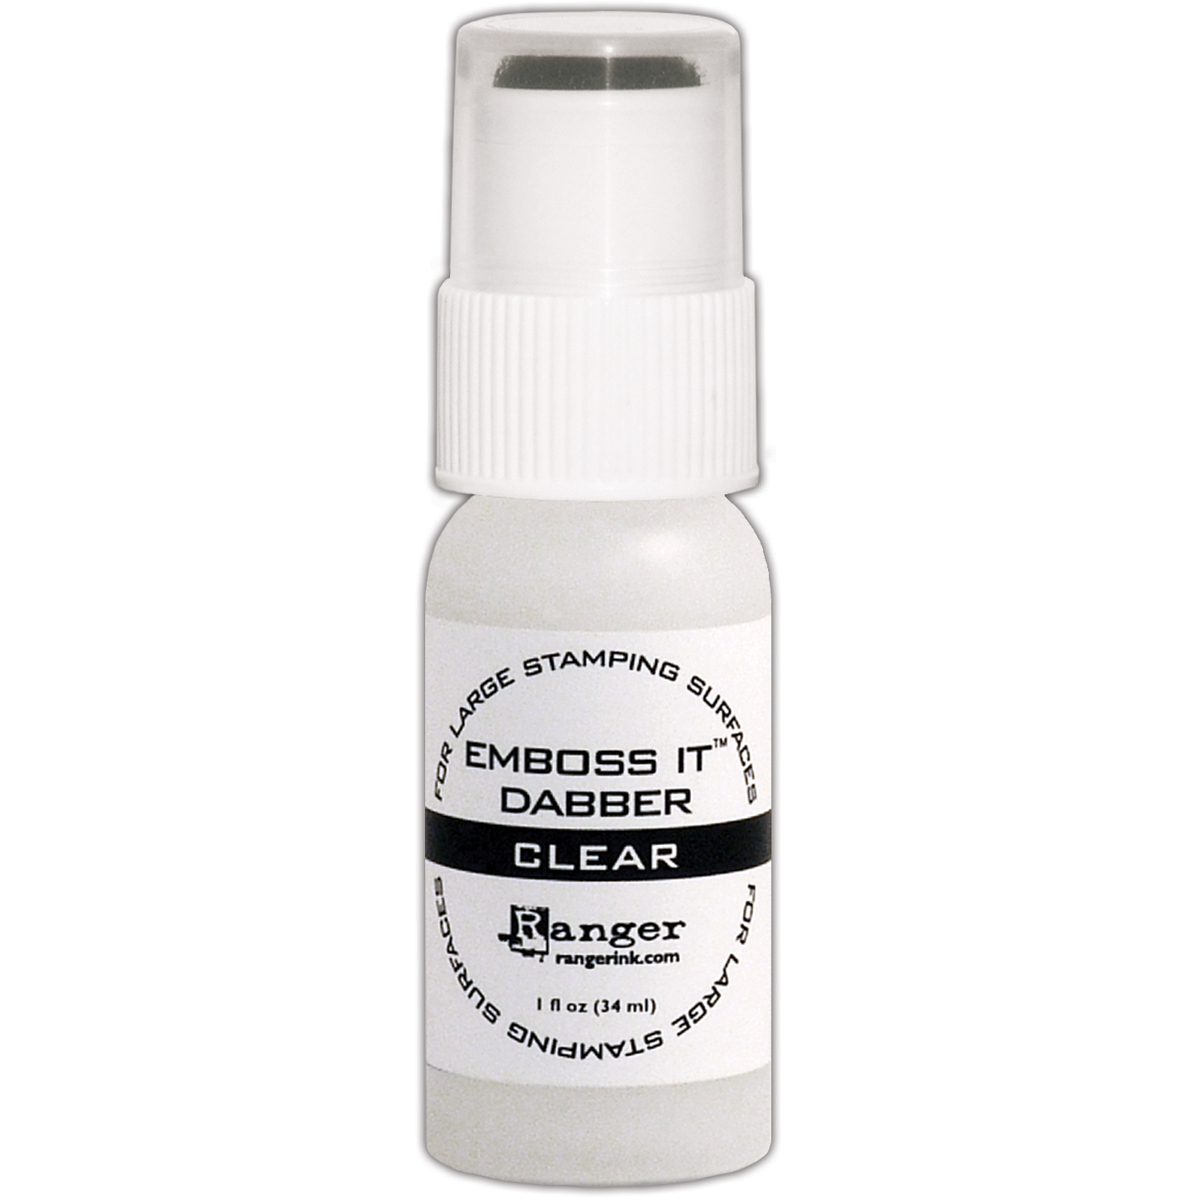 Emboss It Embossing Ink: Acid Free/Nontoxic, 1 ounce - image 1 of 2